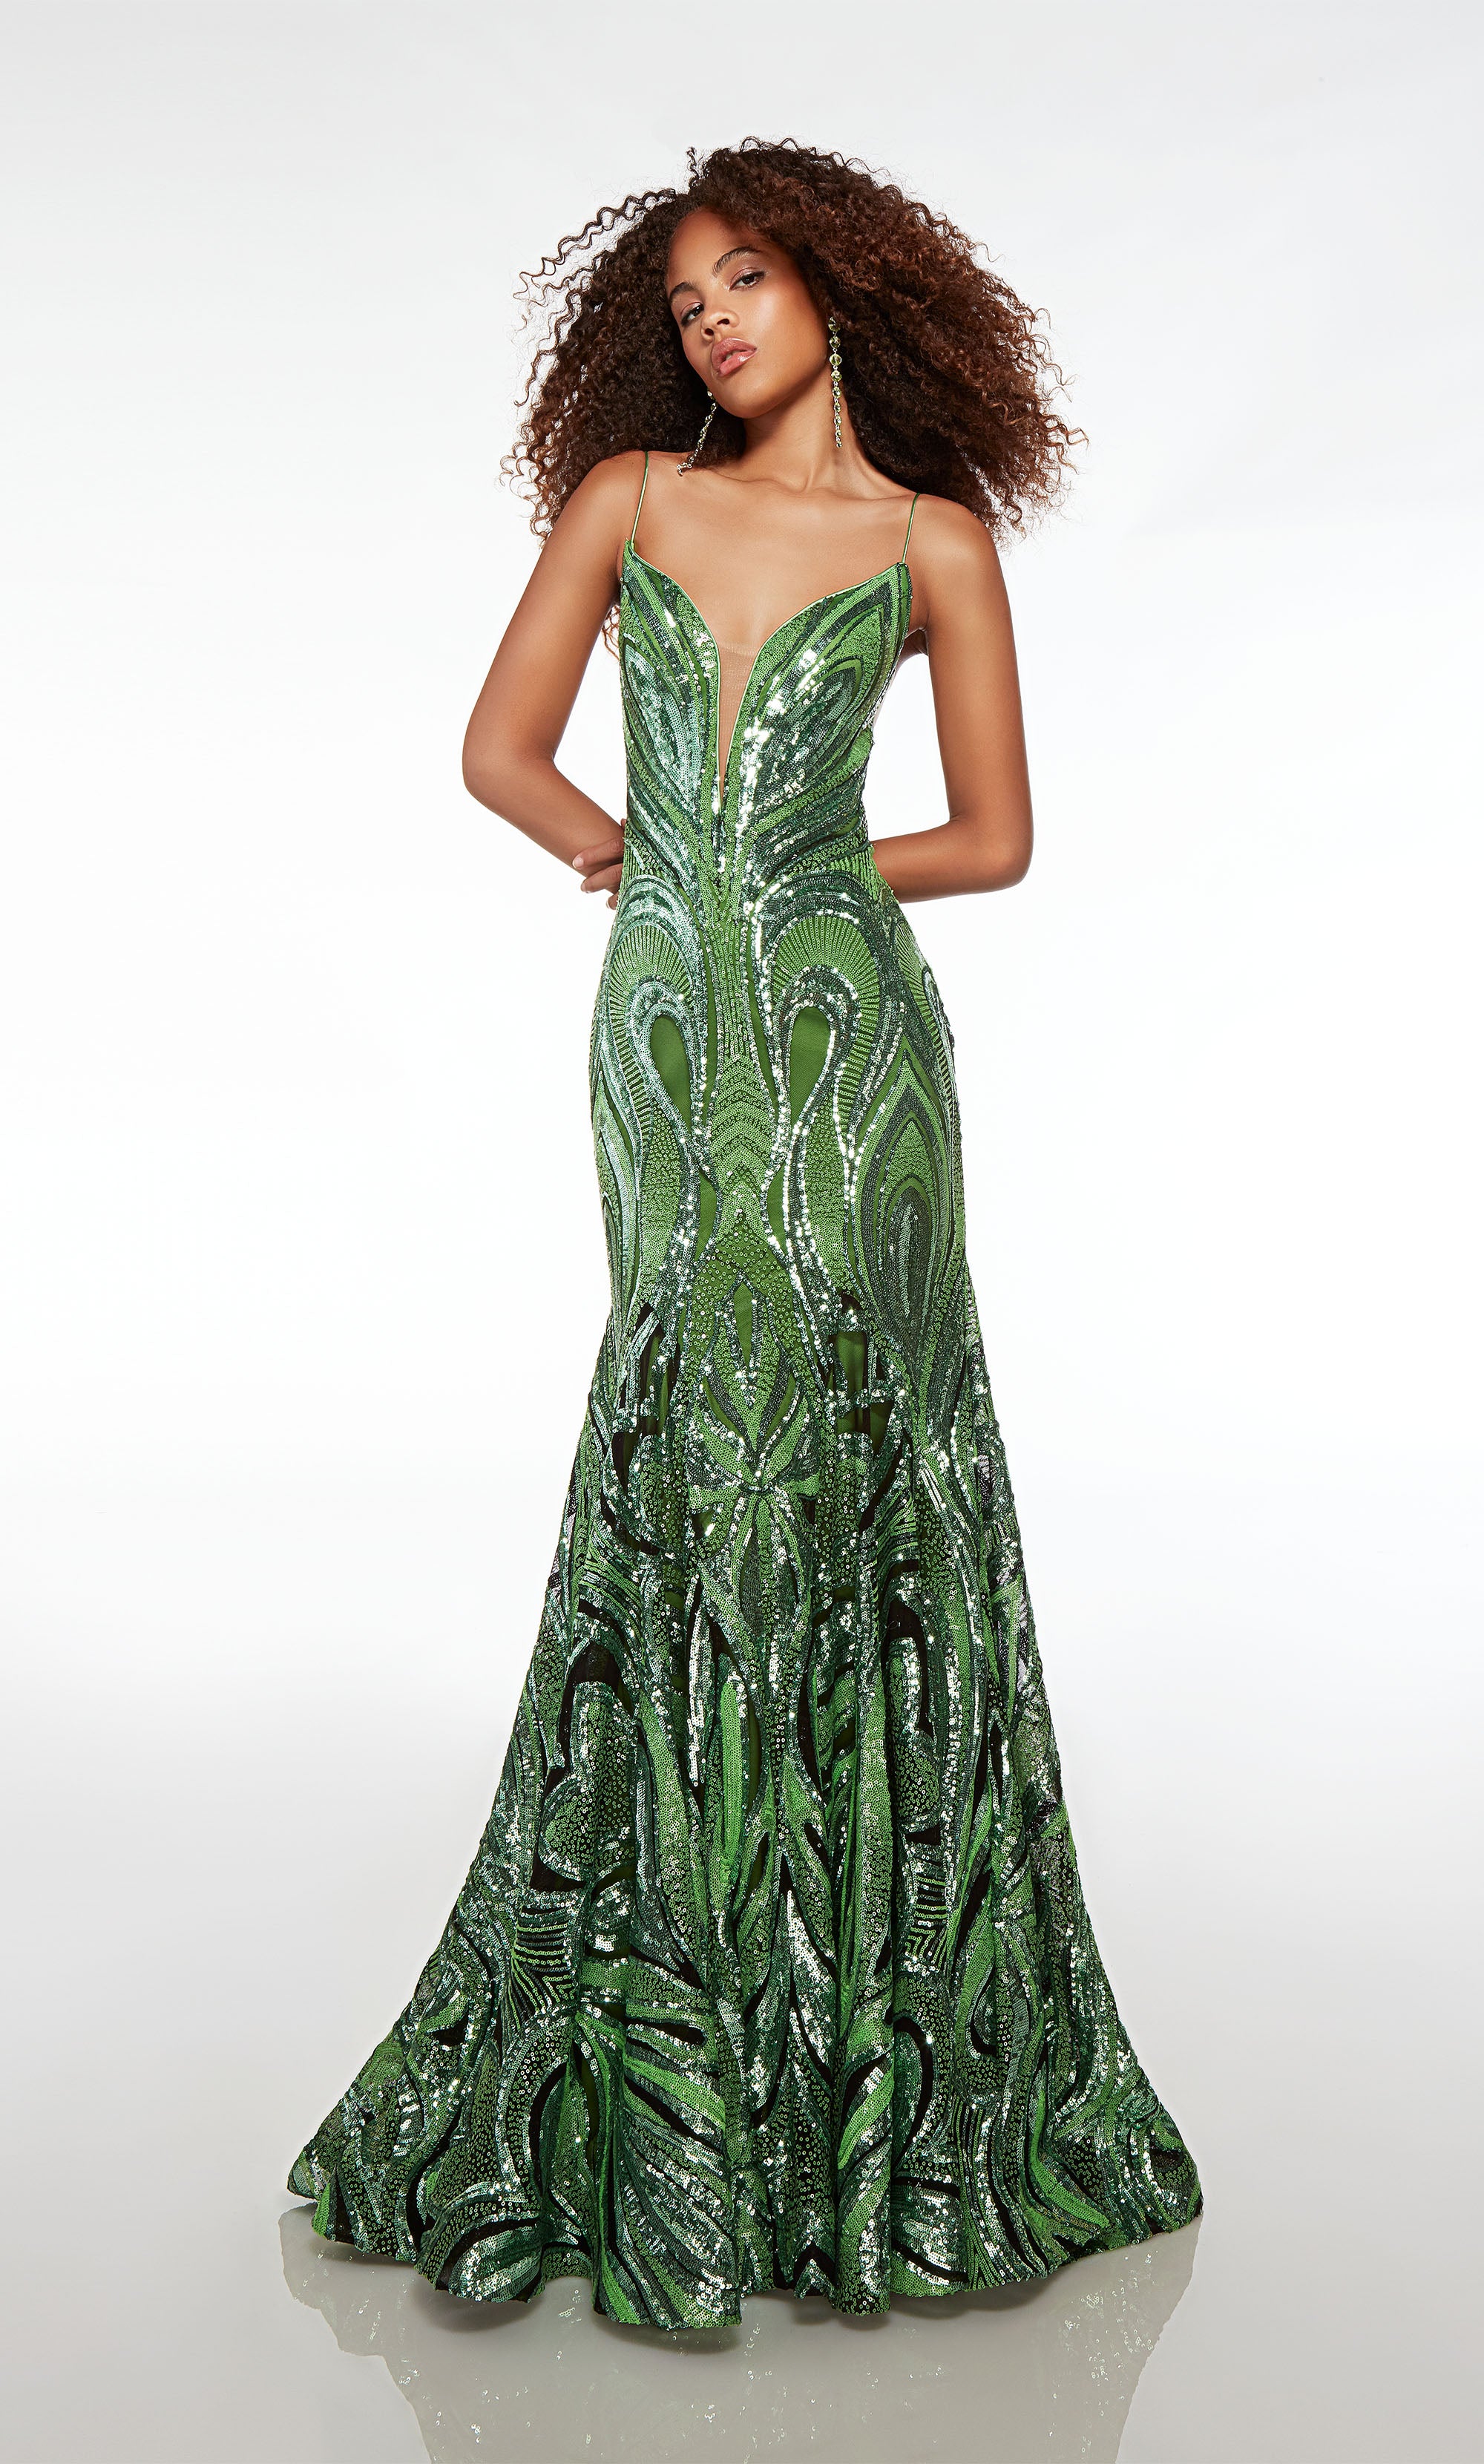 Newest Design Mermaid Evening Dress Halter Neck Green Party Gown With  Detachable Tail - AliExpress